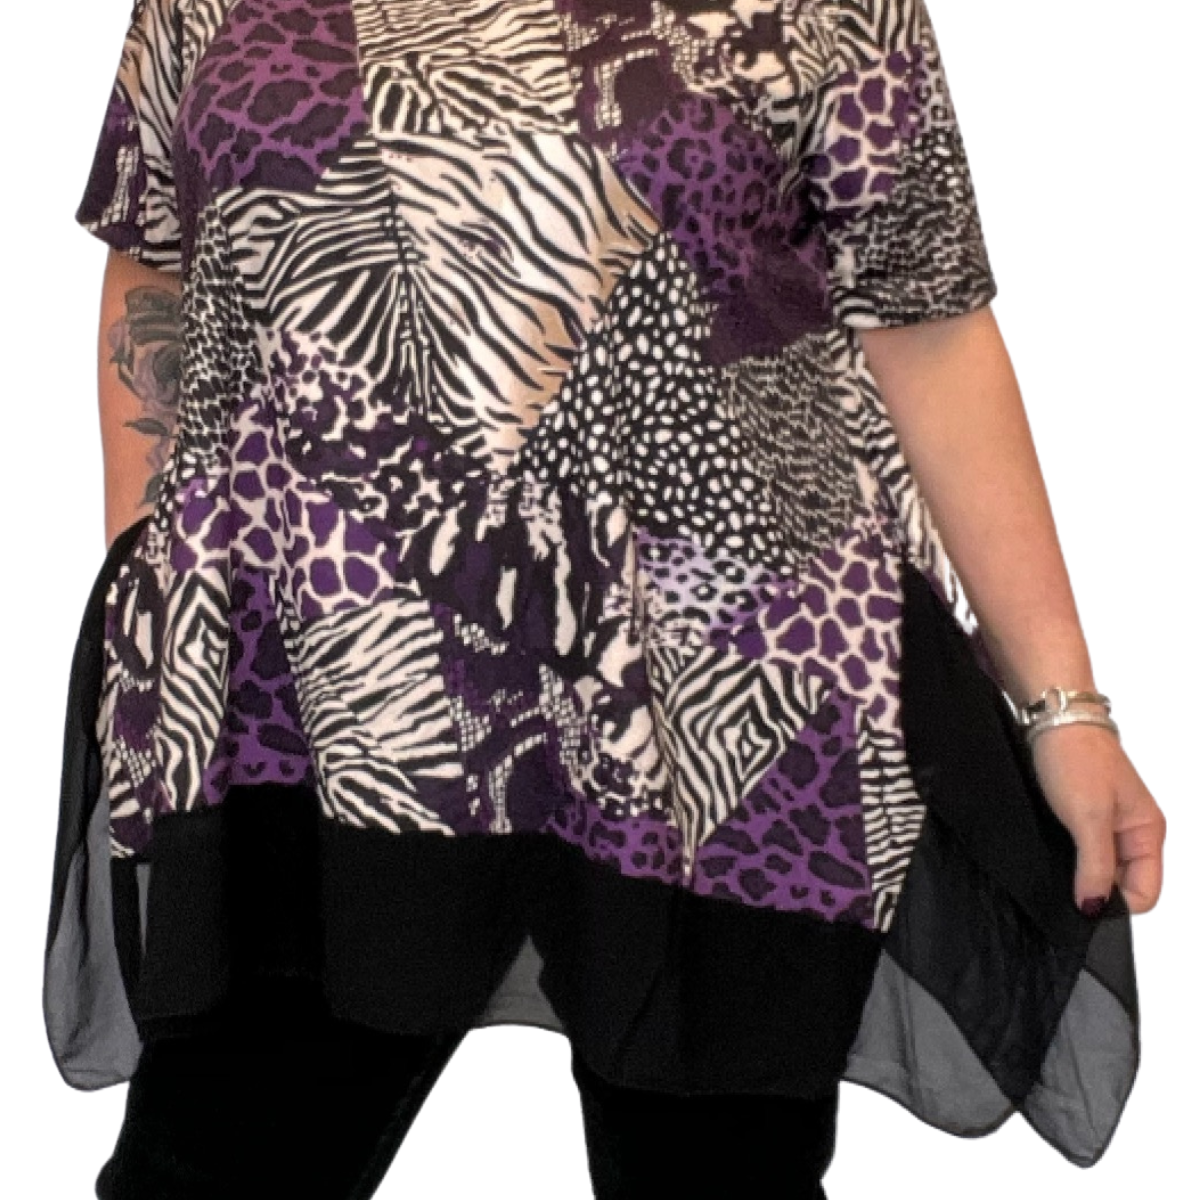 ROCKTHOSECURVES SHORT SLEEVE ANIMAL ABSTRACT LOOSE FITTING TOP WITH CHIFFON HANKY HEM